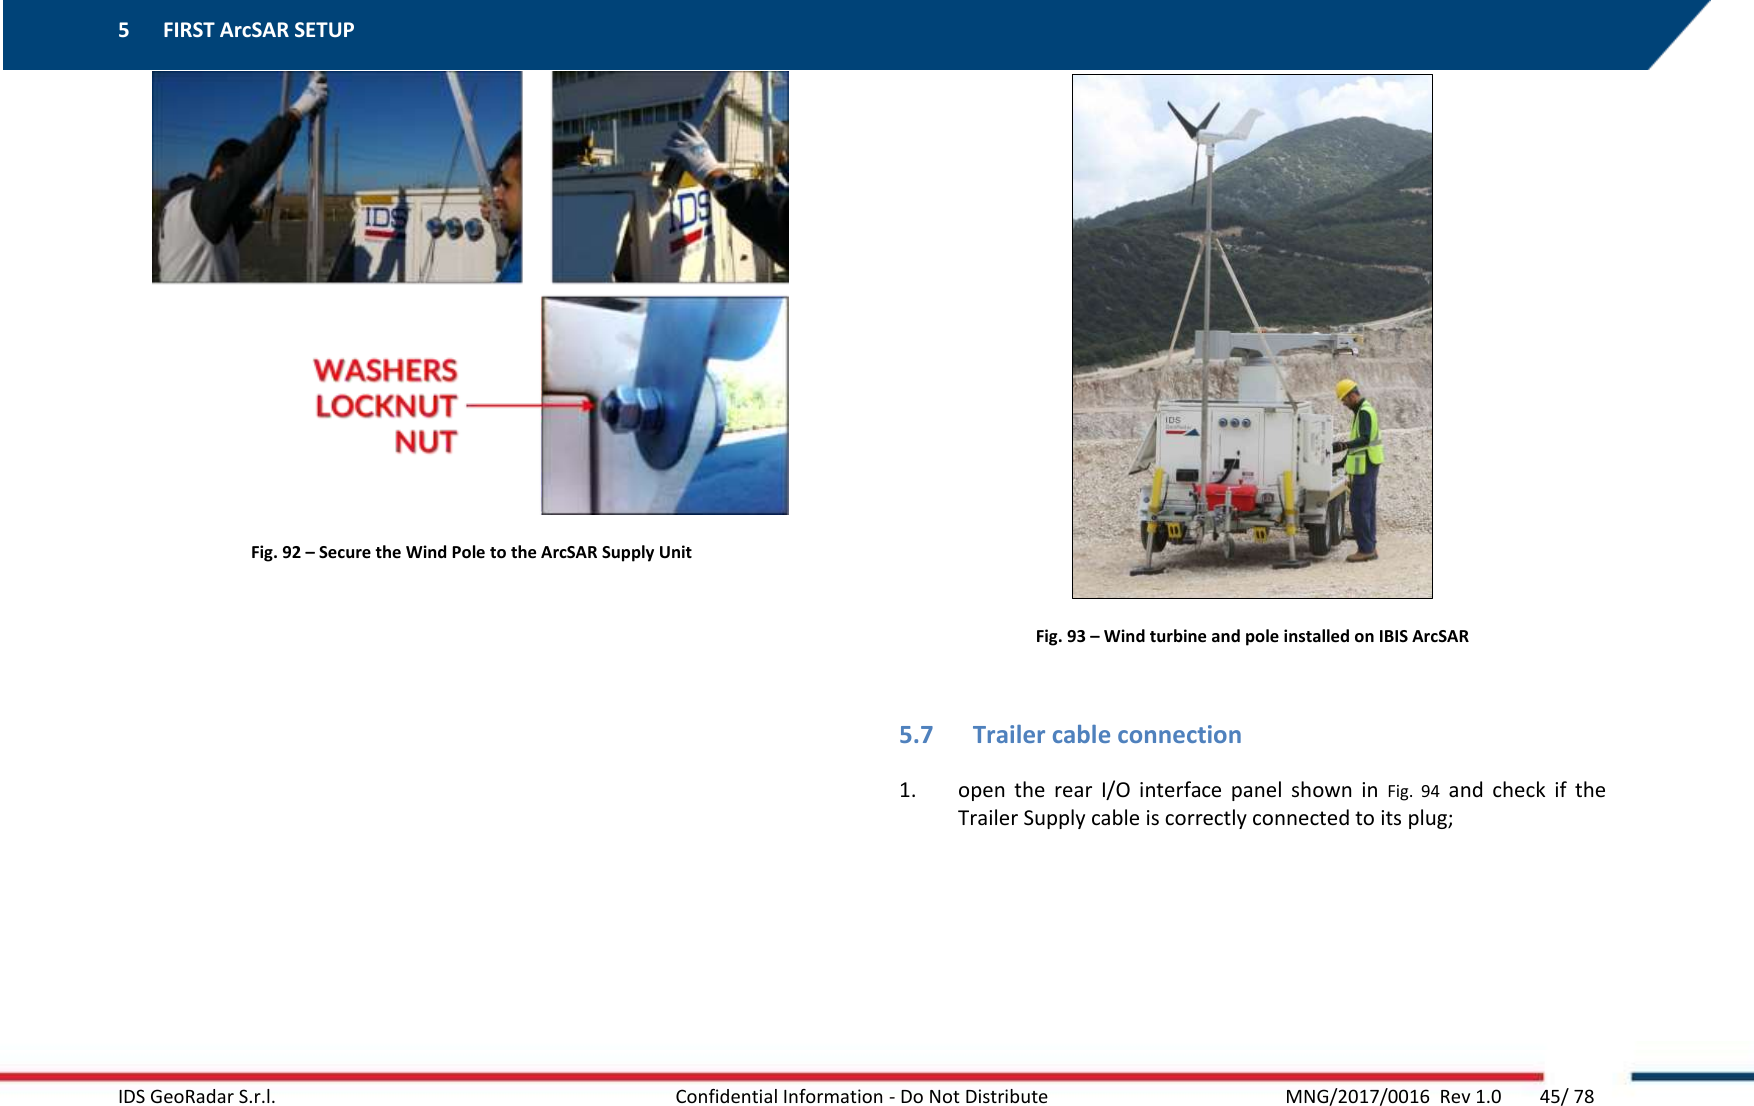 5 FIRST ArcSAR SETUP    IDS GeoRadar S.r.l.  Confidential Information - Do Not Distribute     MNG/2017/0016  Rev 1.0        45/ 78  Fig. 92 – Secure the Wind Pole to the ArcSAR Supply Unit  Fig. 93 – Wind turbine and pole installed on IBIS ArcSAR  5.7 Trailer cable connection 1. open  the  rear  I/O  interface  panel  shown  in  Fig.  94  and  check  if  the Trailer Supply cable is correctly connected to its plug;  